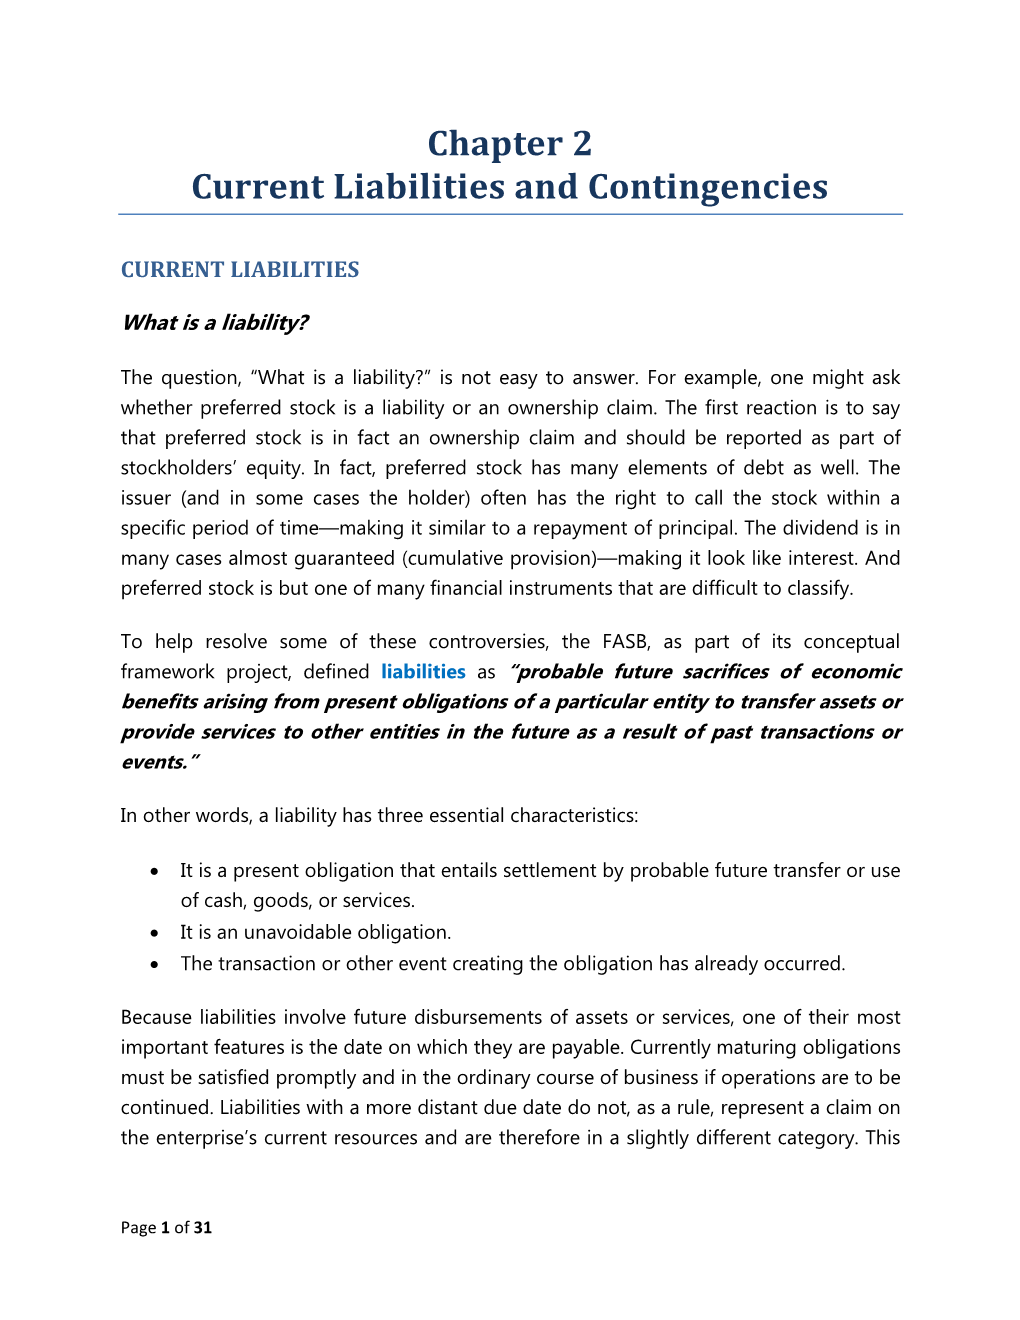 Chapter 2 Current Liabilities and Contingencies